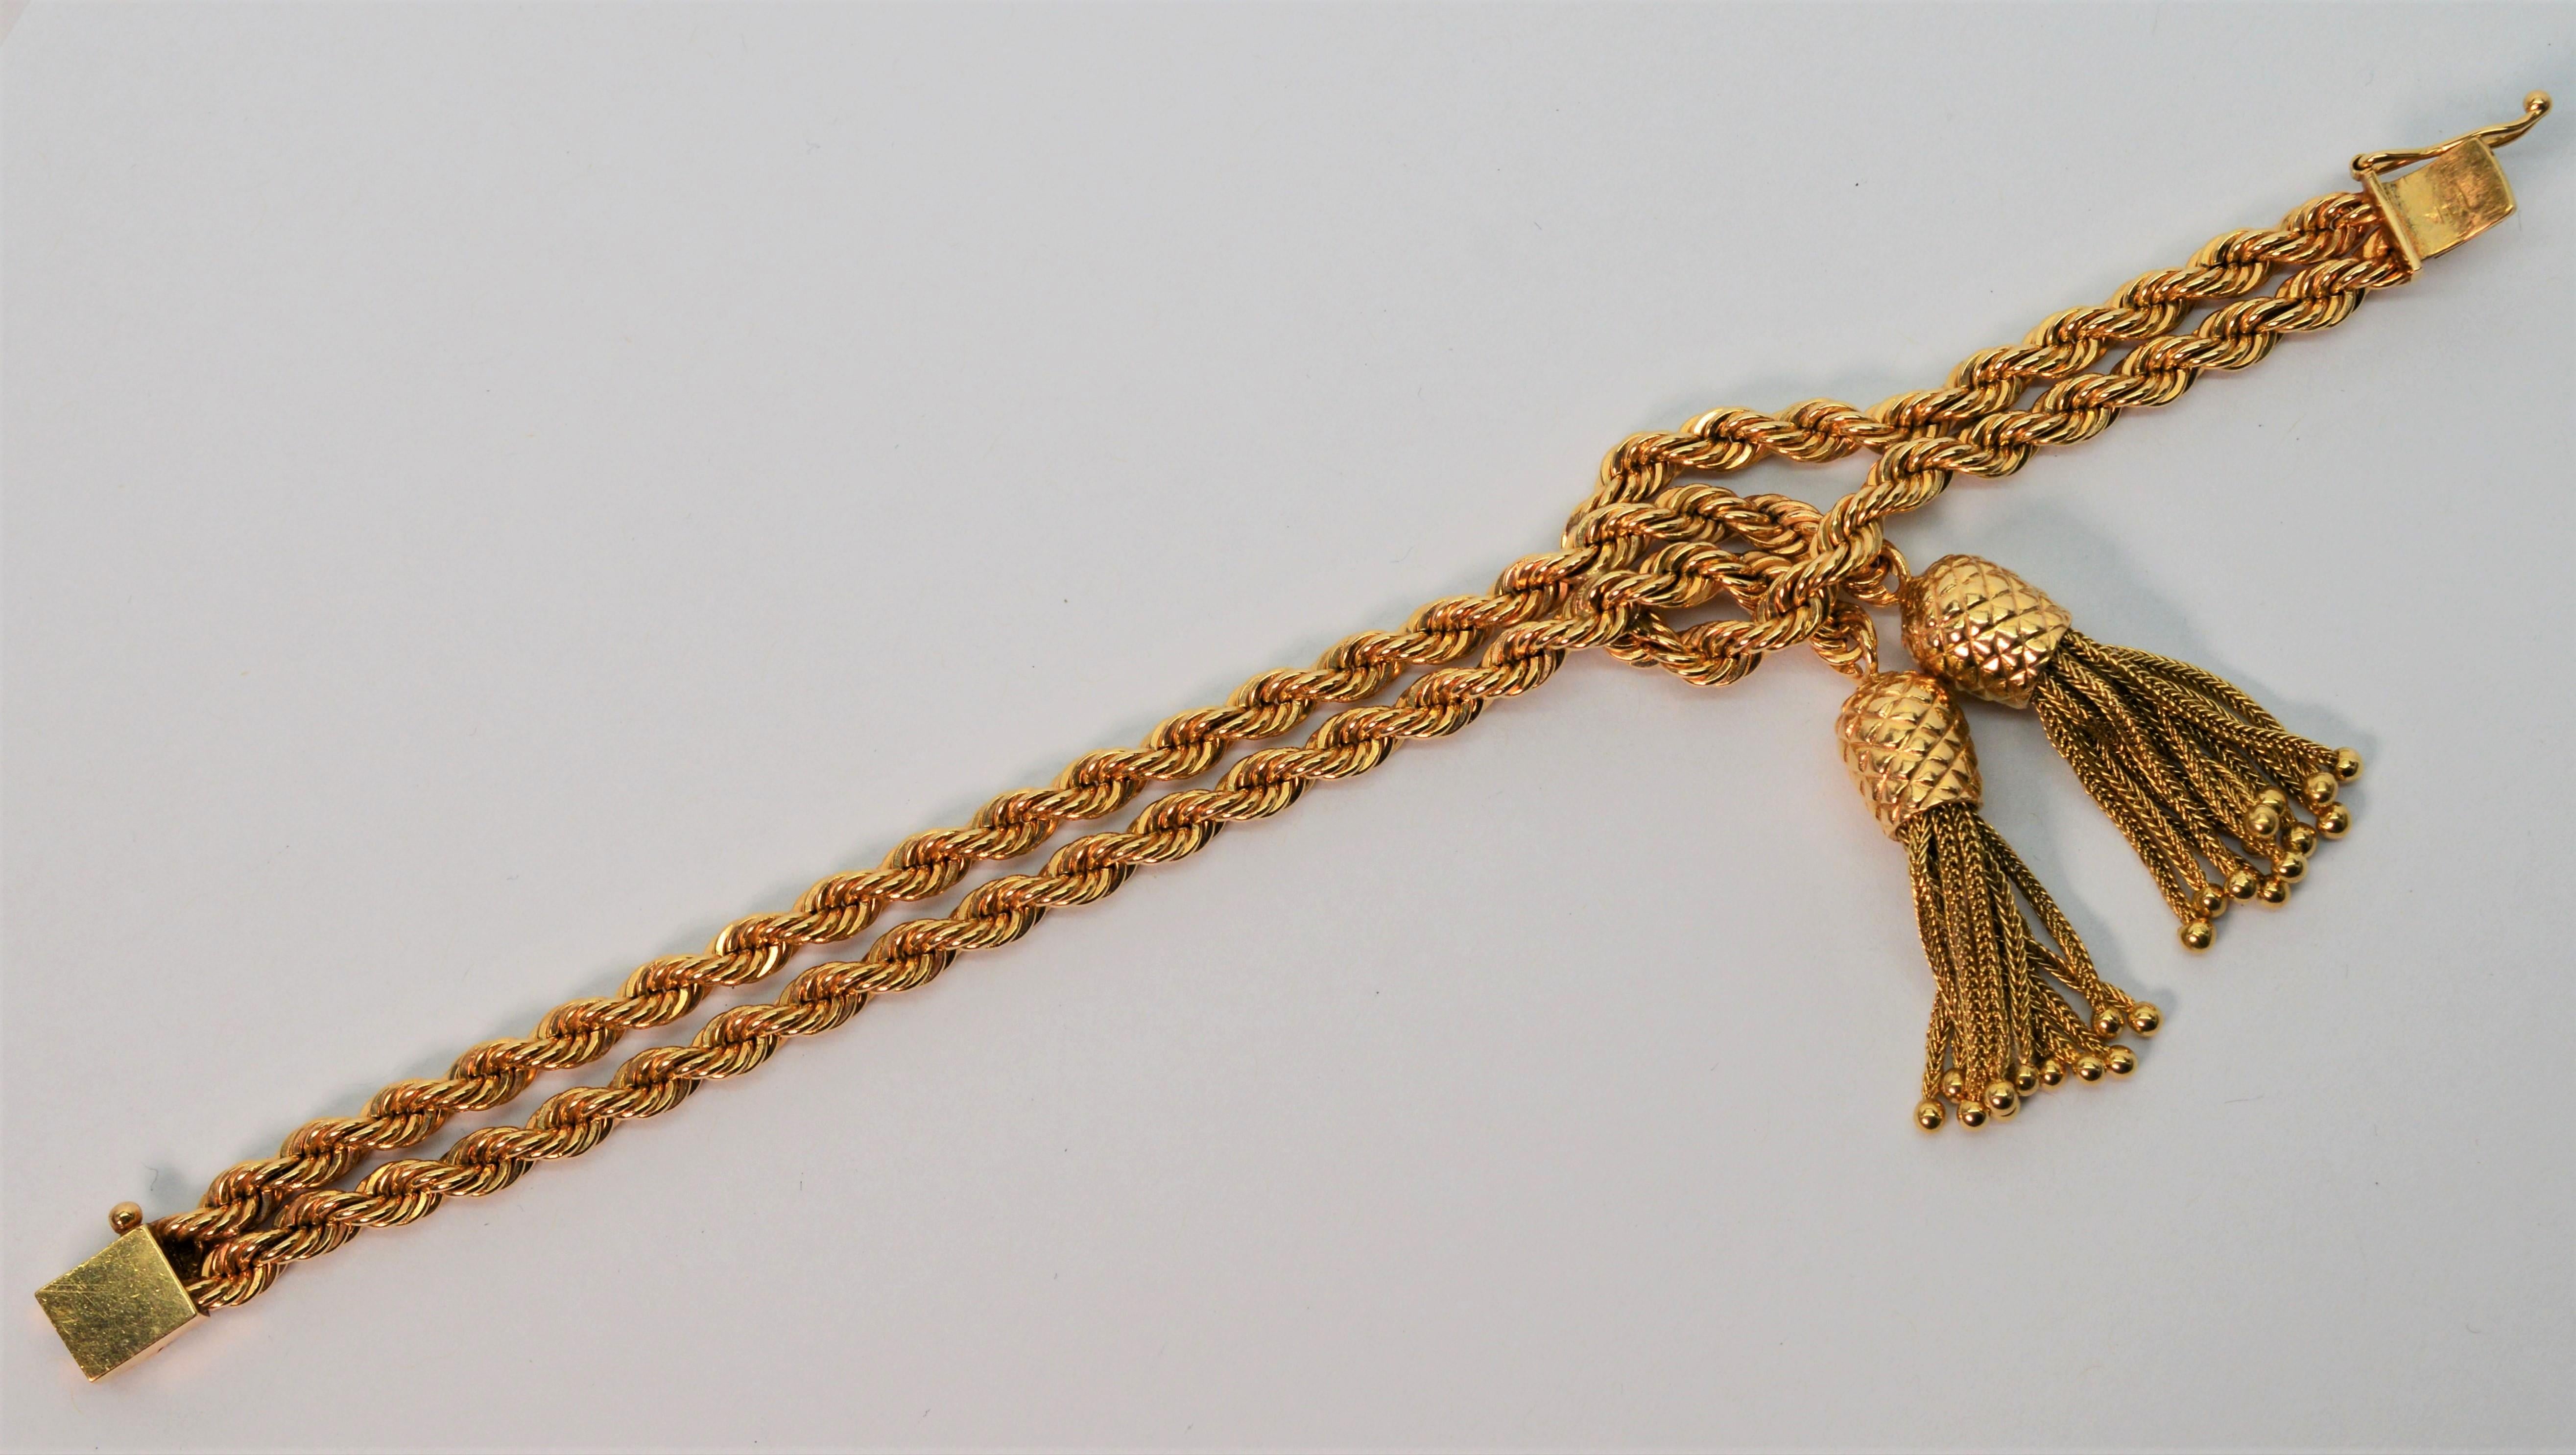 Double Rope Chain 14 Karat Yellow Gold Bracelet with Pineapple Charm Tassels 2